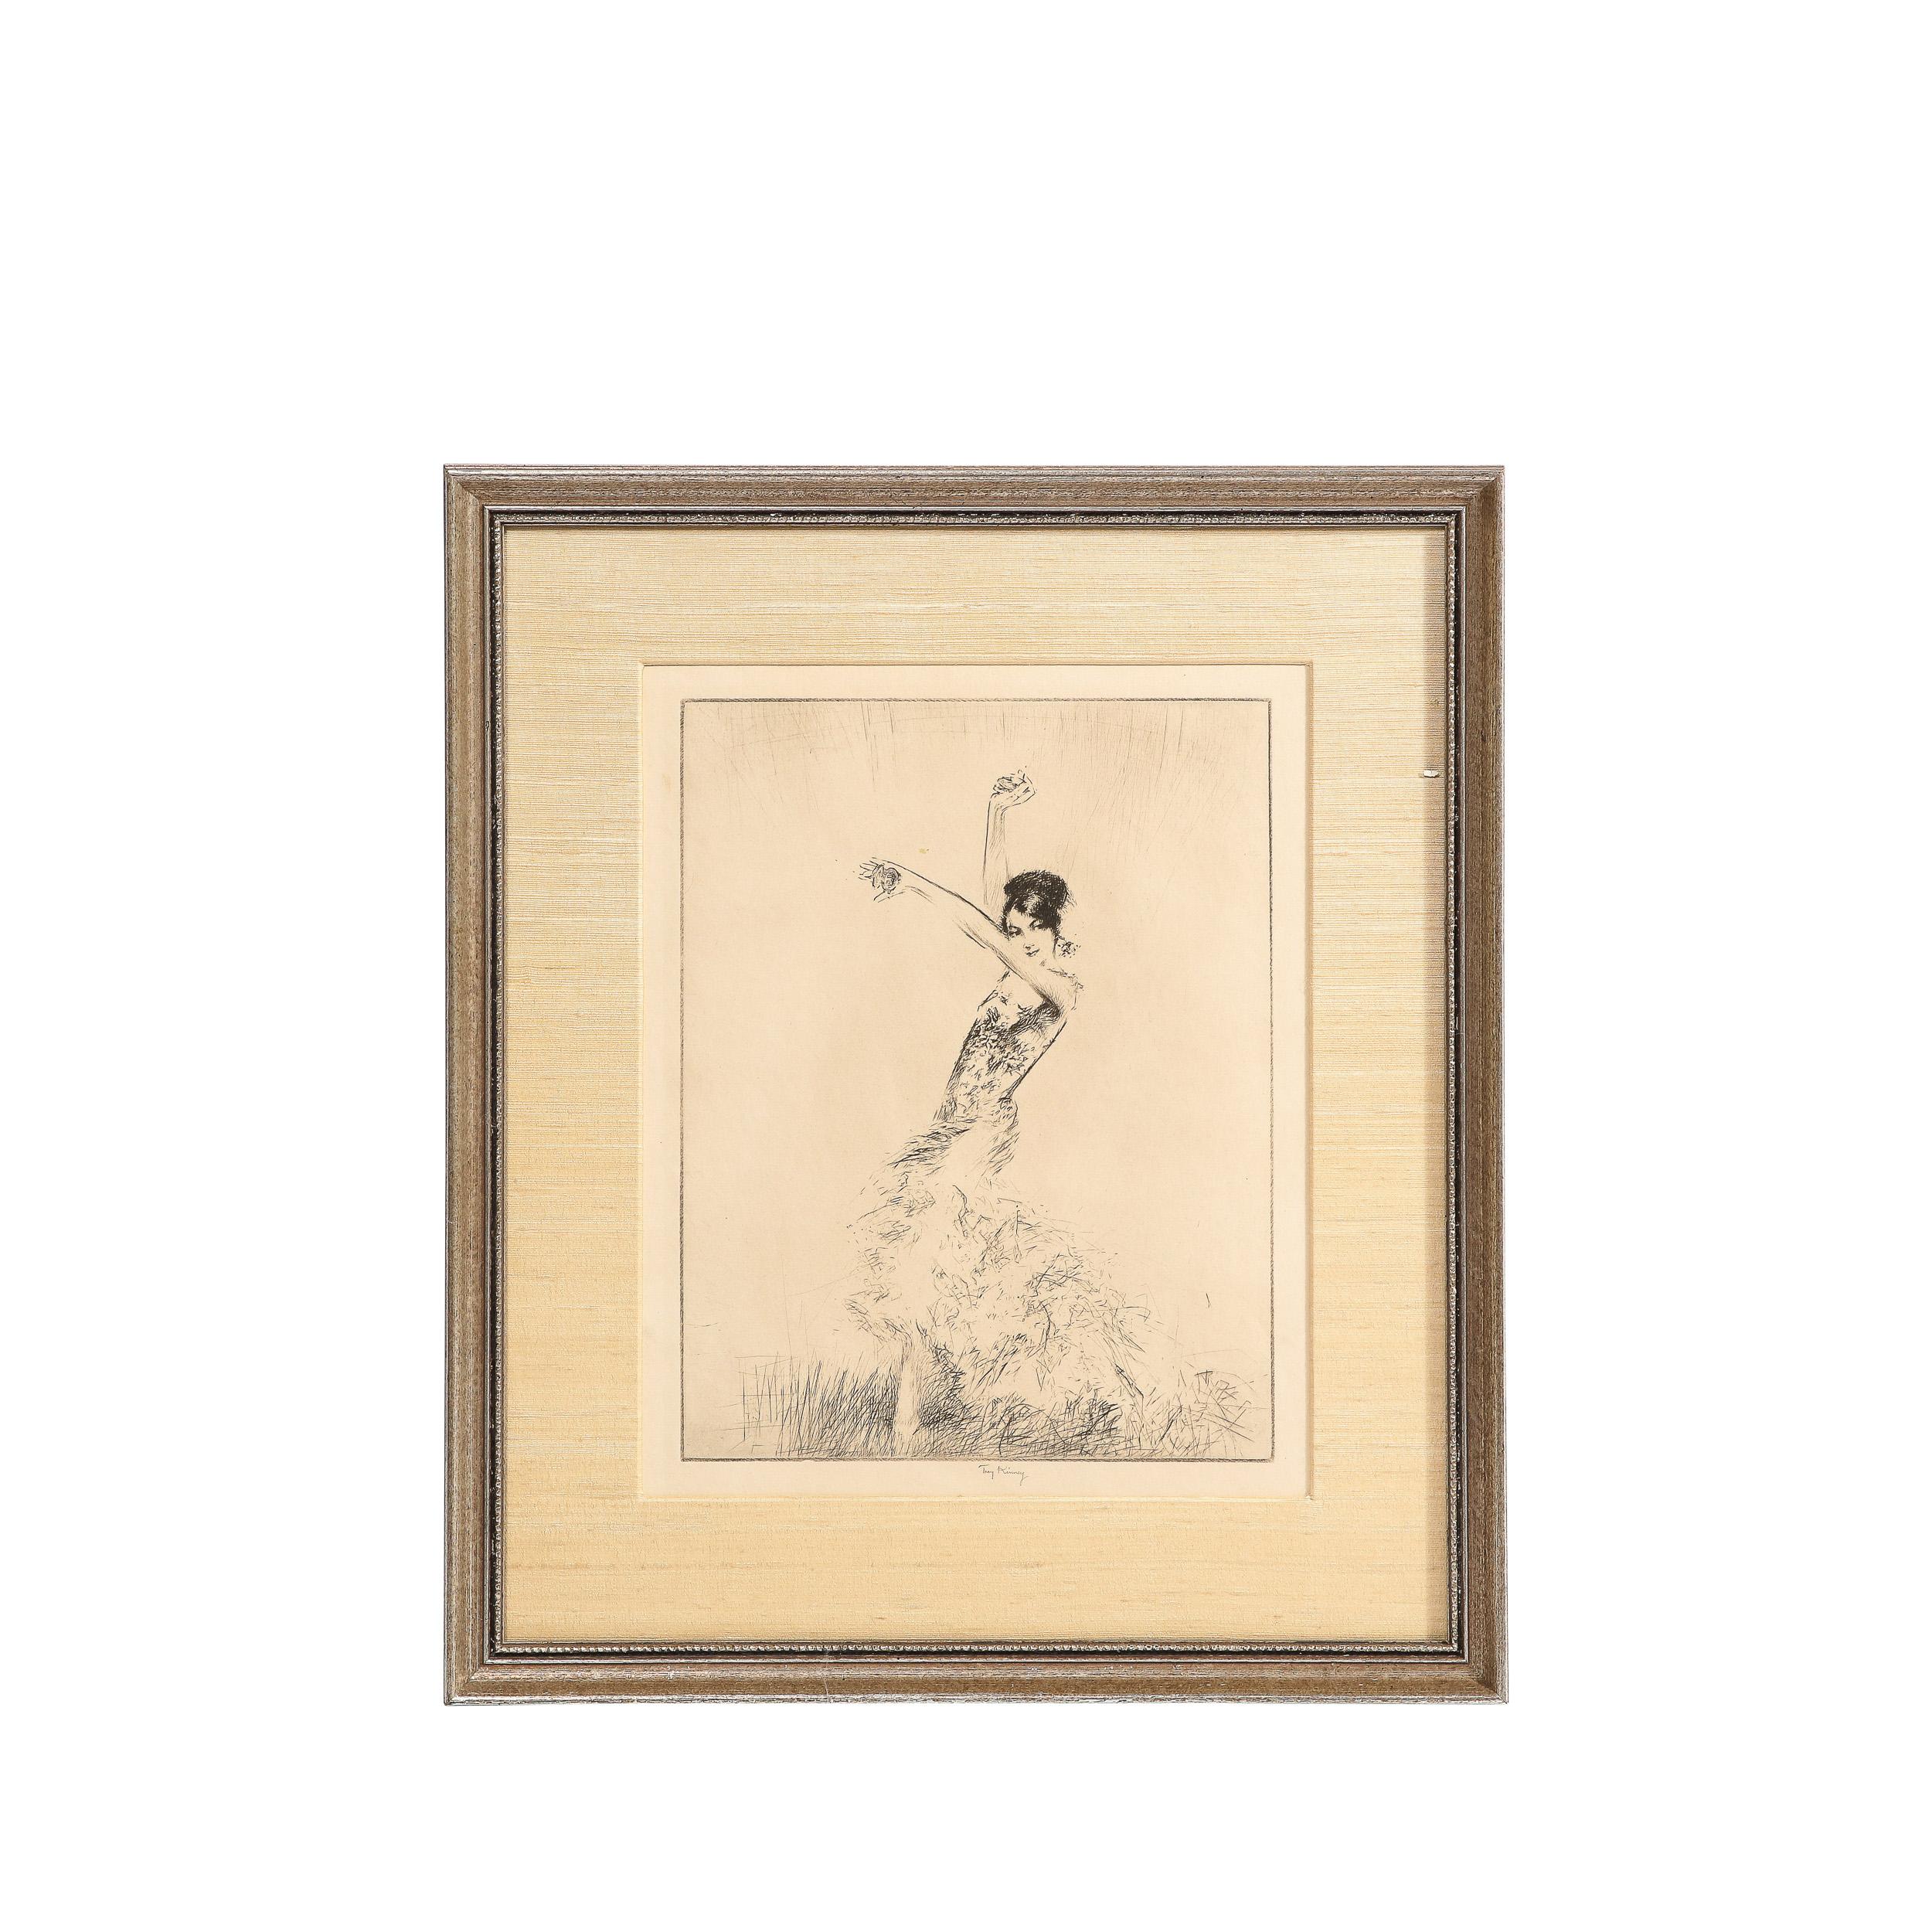 This refined etching and drypoint was realized by the esteemed American artist Troy Kinney in the United States circa 1920. The work features a lone female figure (presumable Doris Niles)  in a quintessentially Art Deco dress against a blank